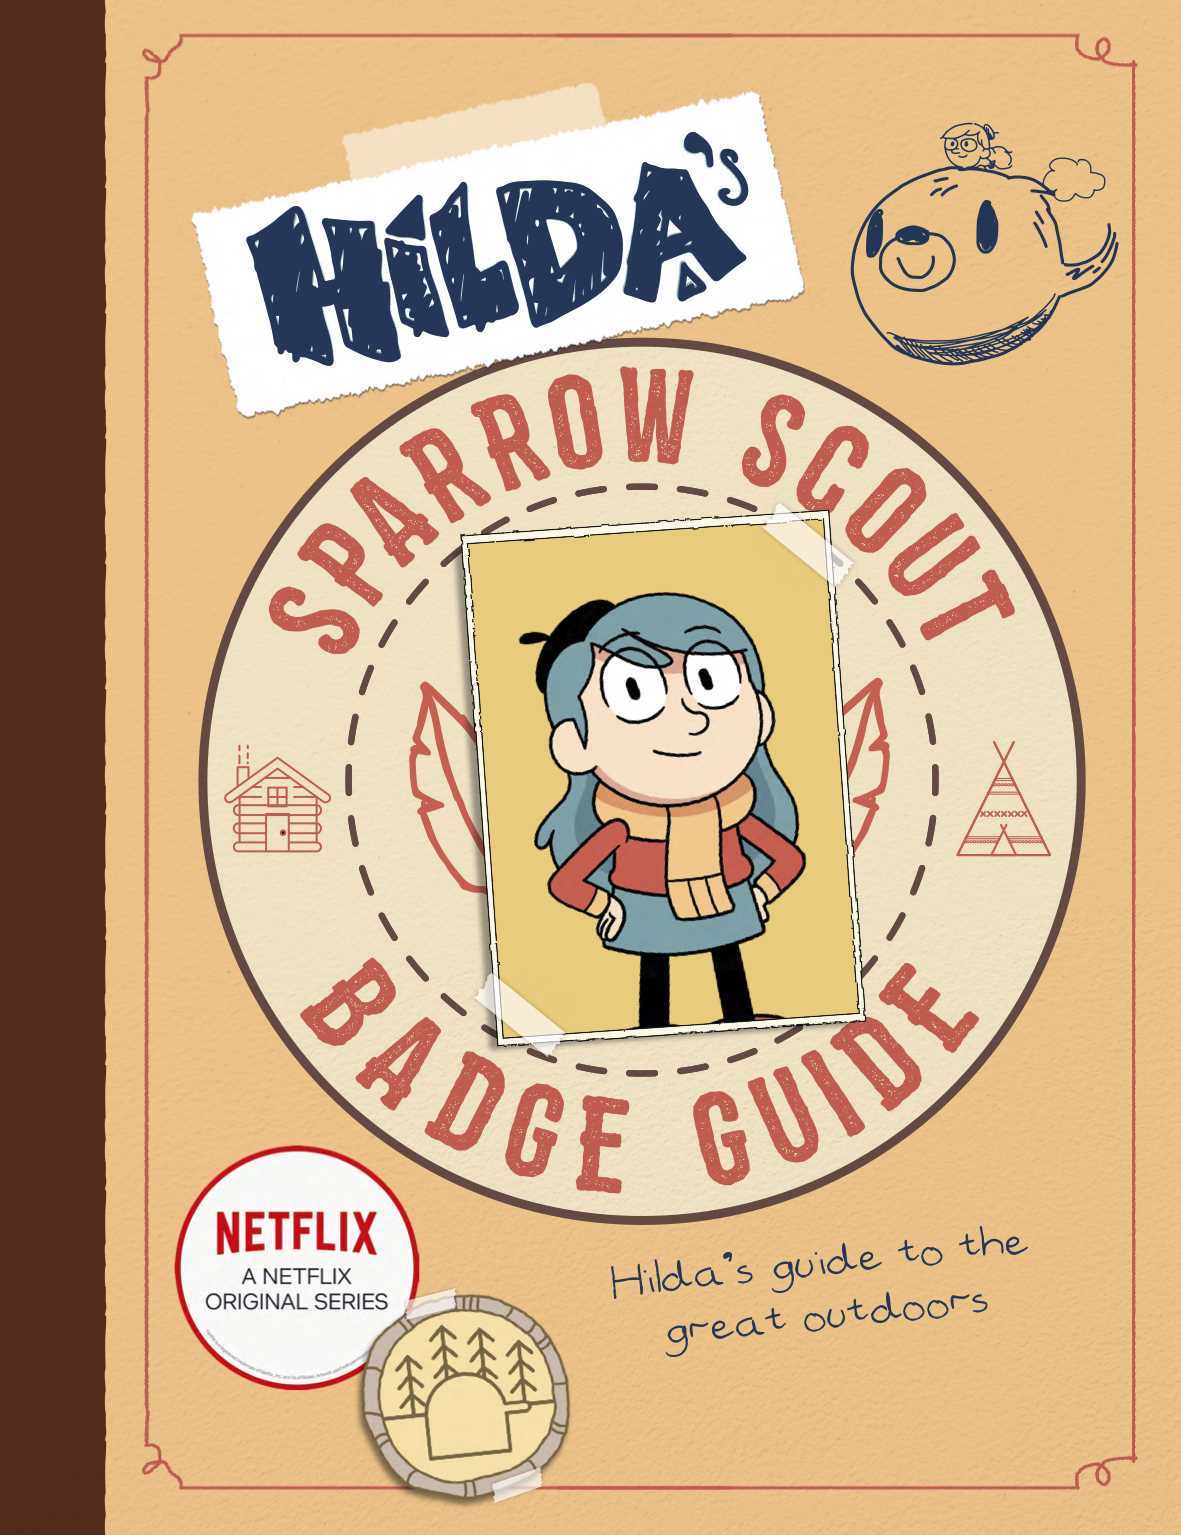 Hilda's Sparrow Scout Badge Guide